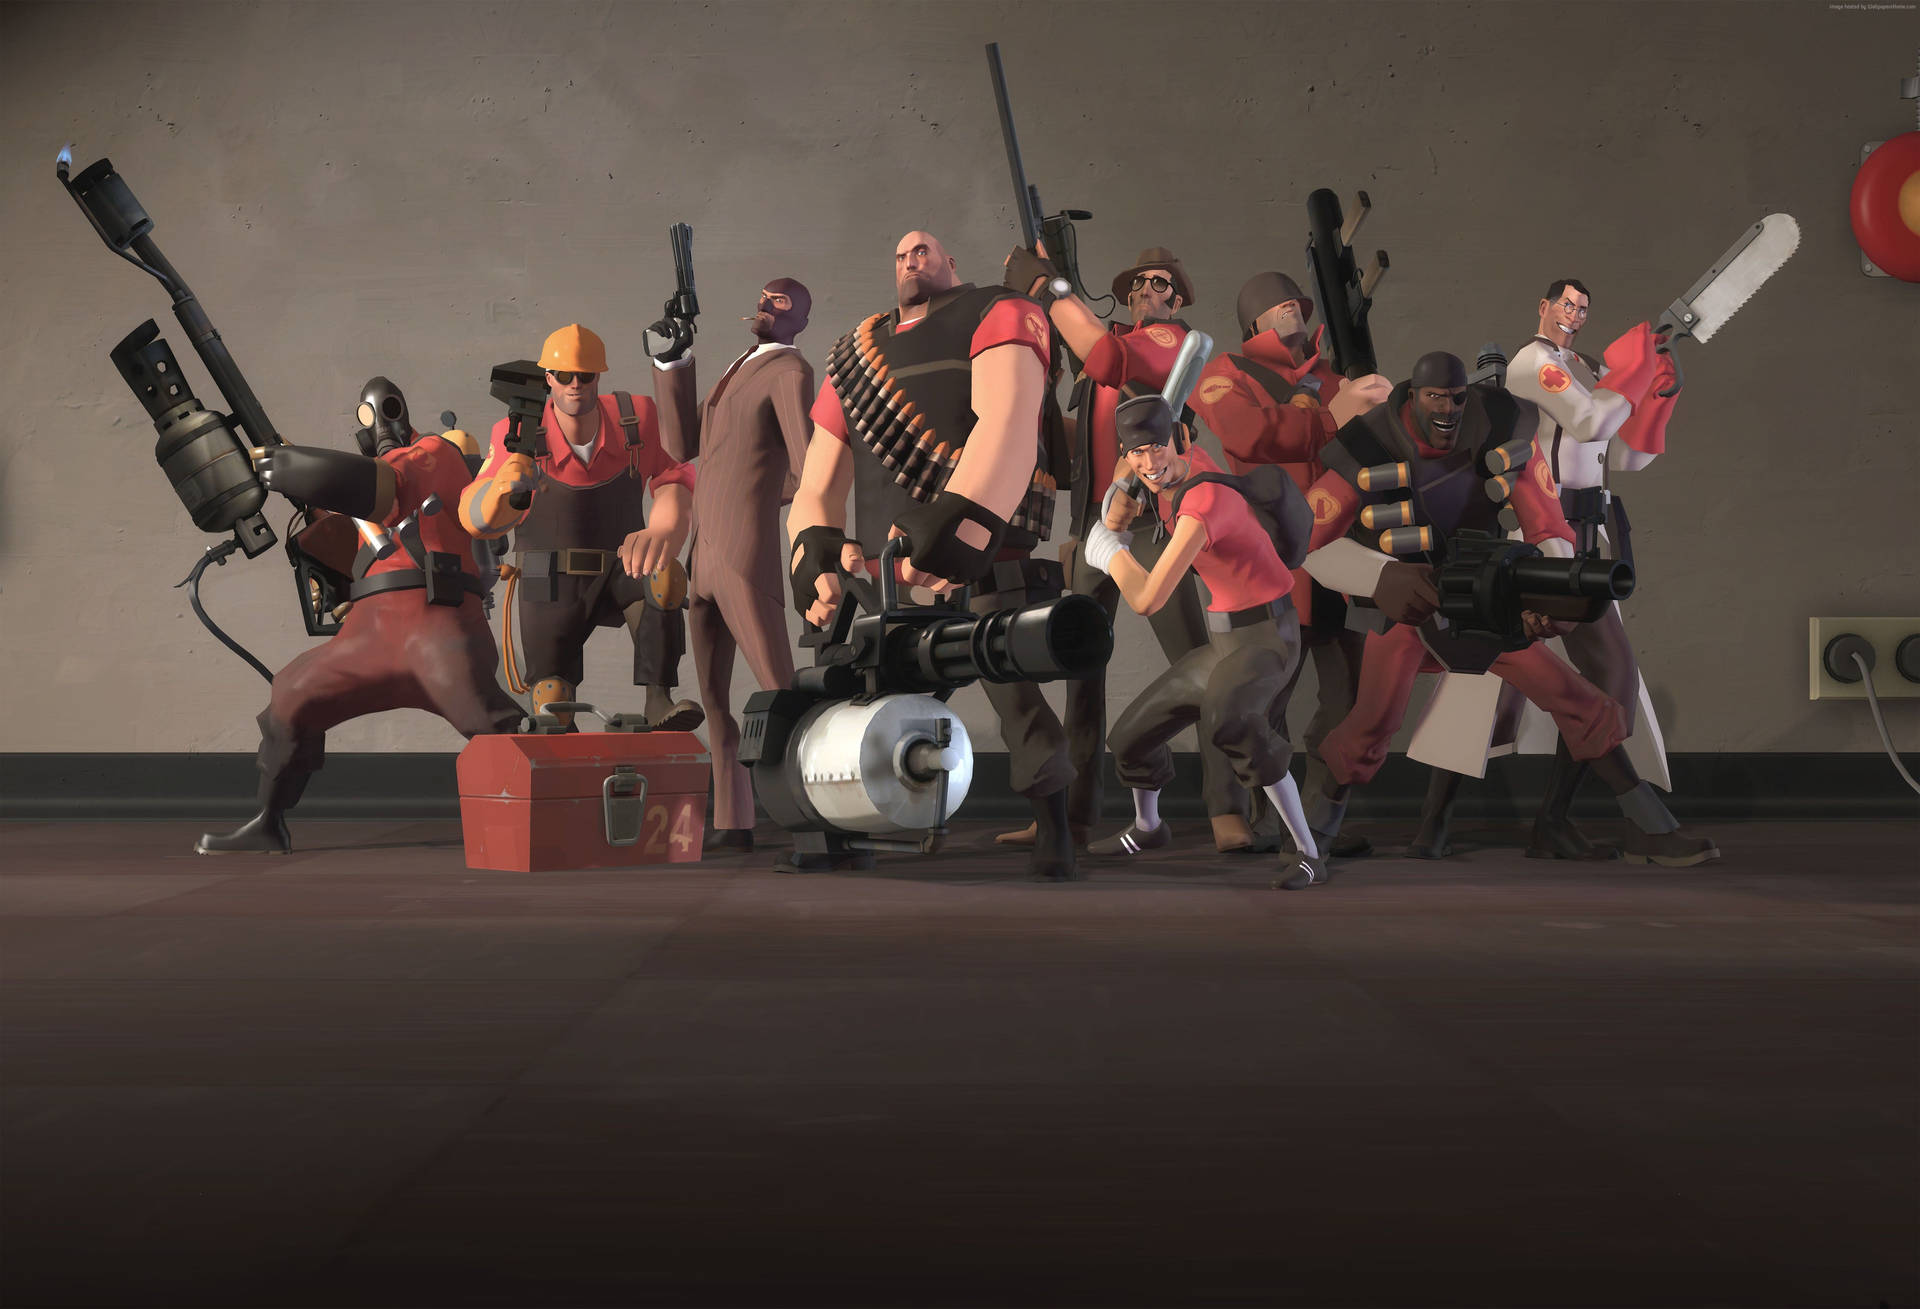 Tf2 5100X3476 Wallpaper and Background Image